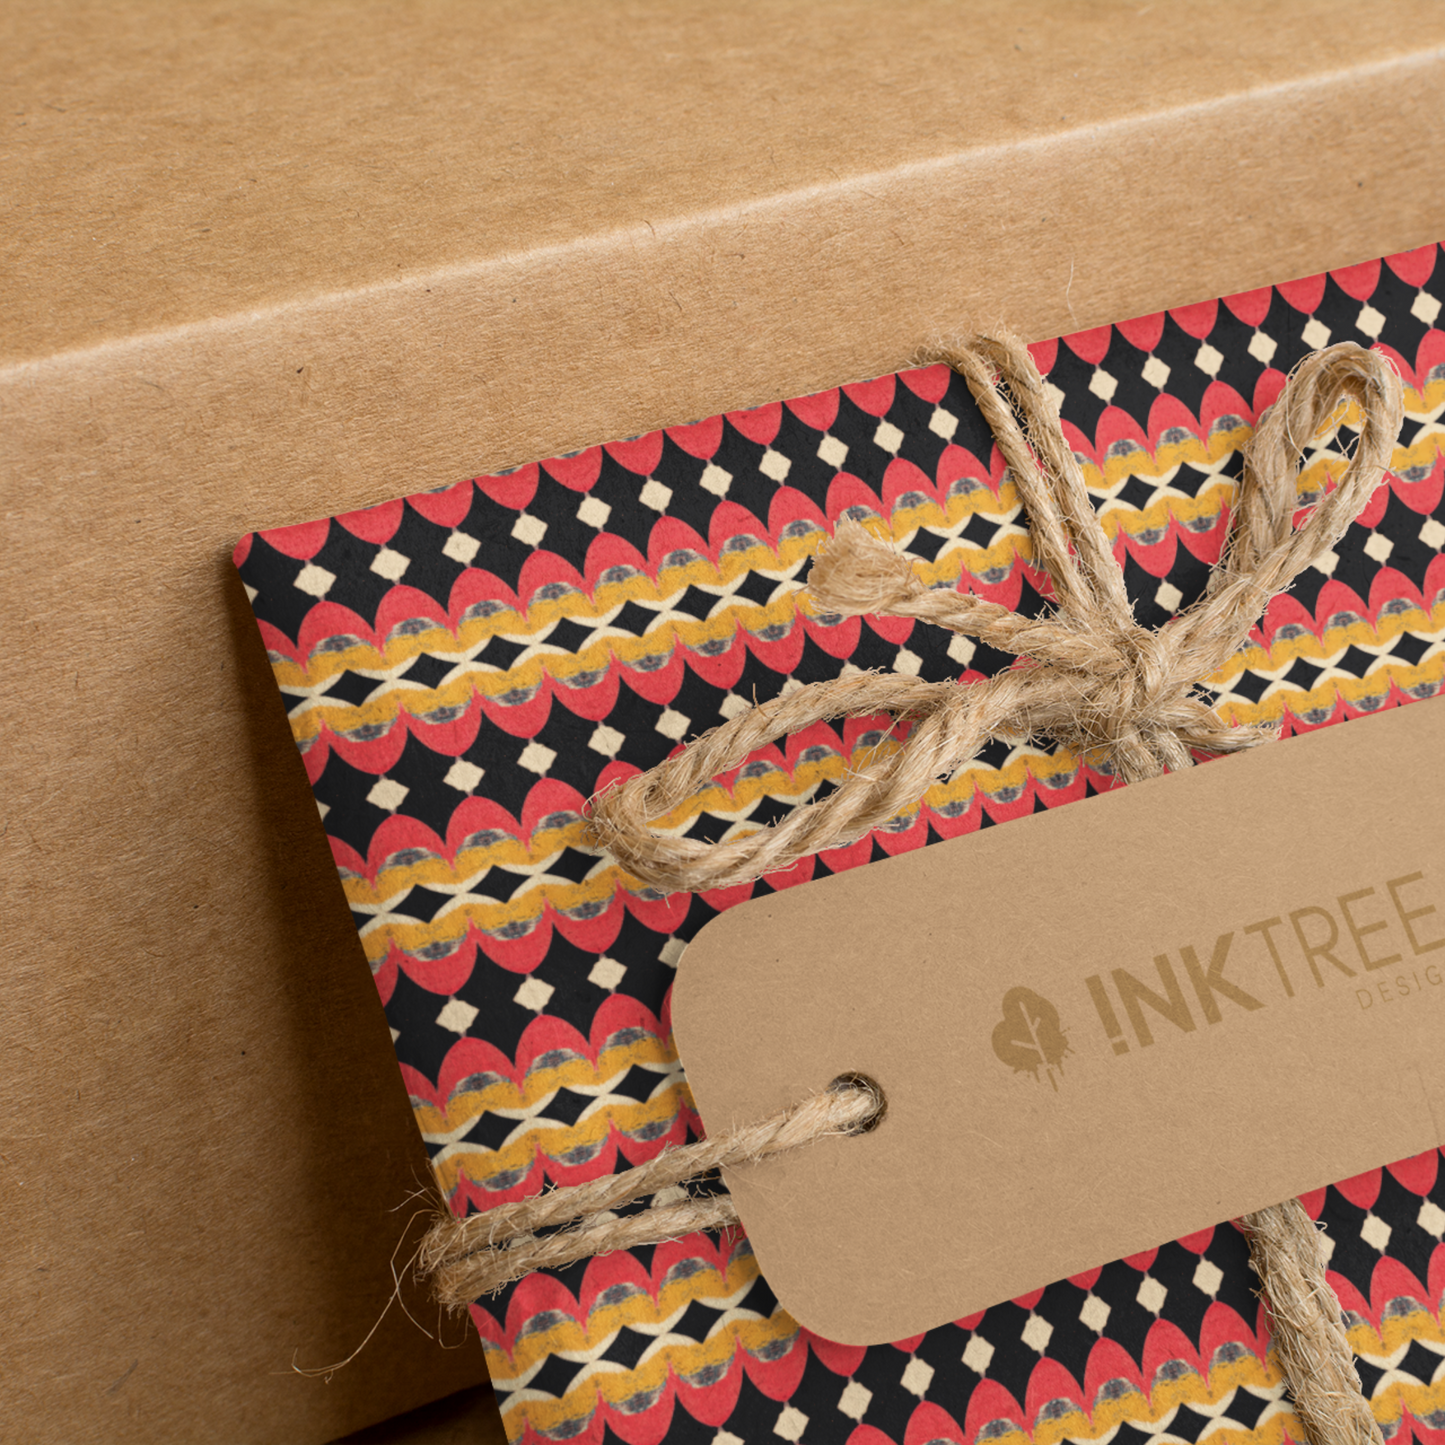 A present wrapped with an orange, black, white and yellow horizontal pattern, tied with brown string with a brown paper tag with ink tree design logo on it, leaning on a brown paper background.